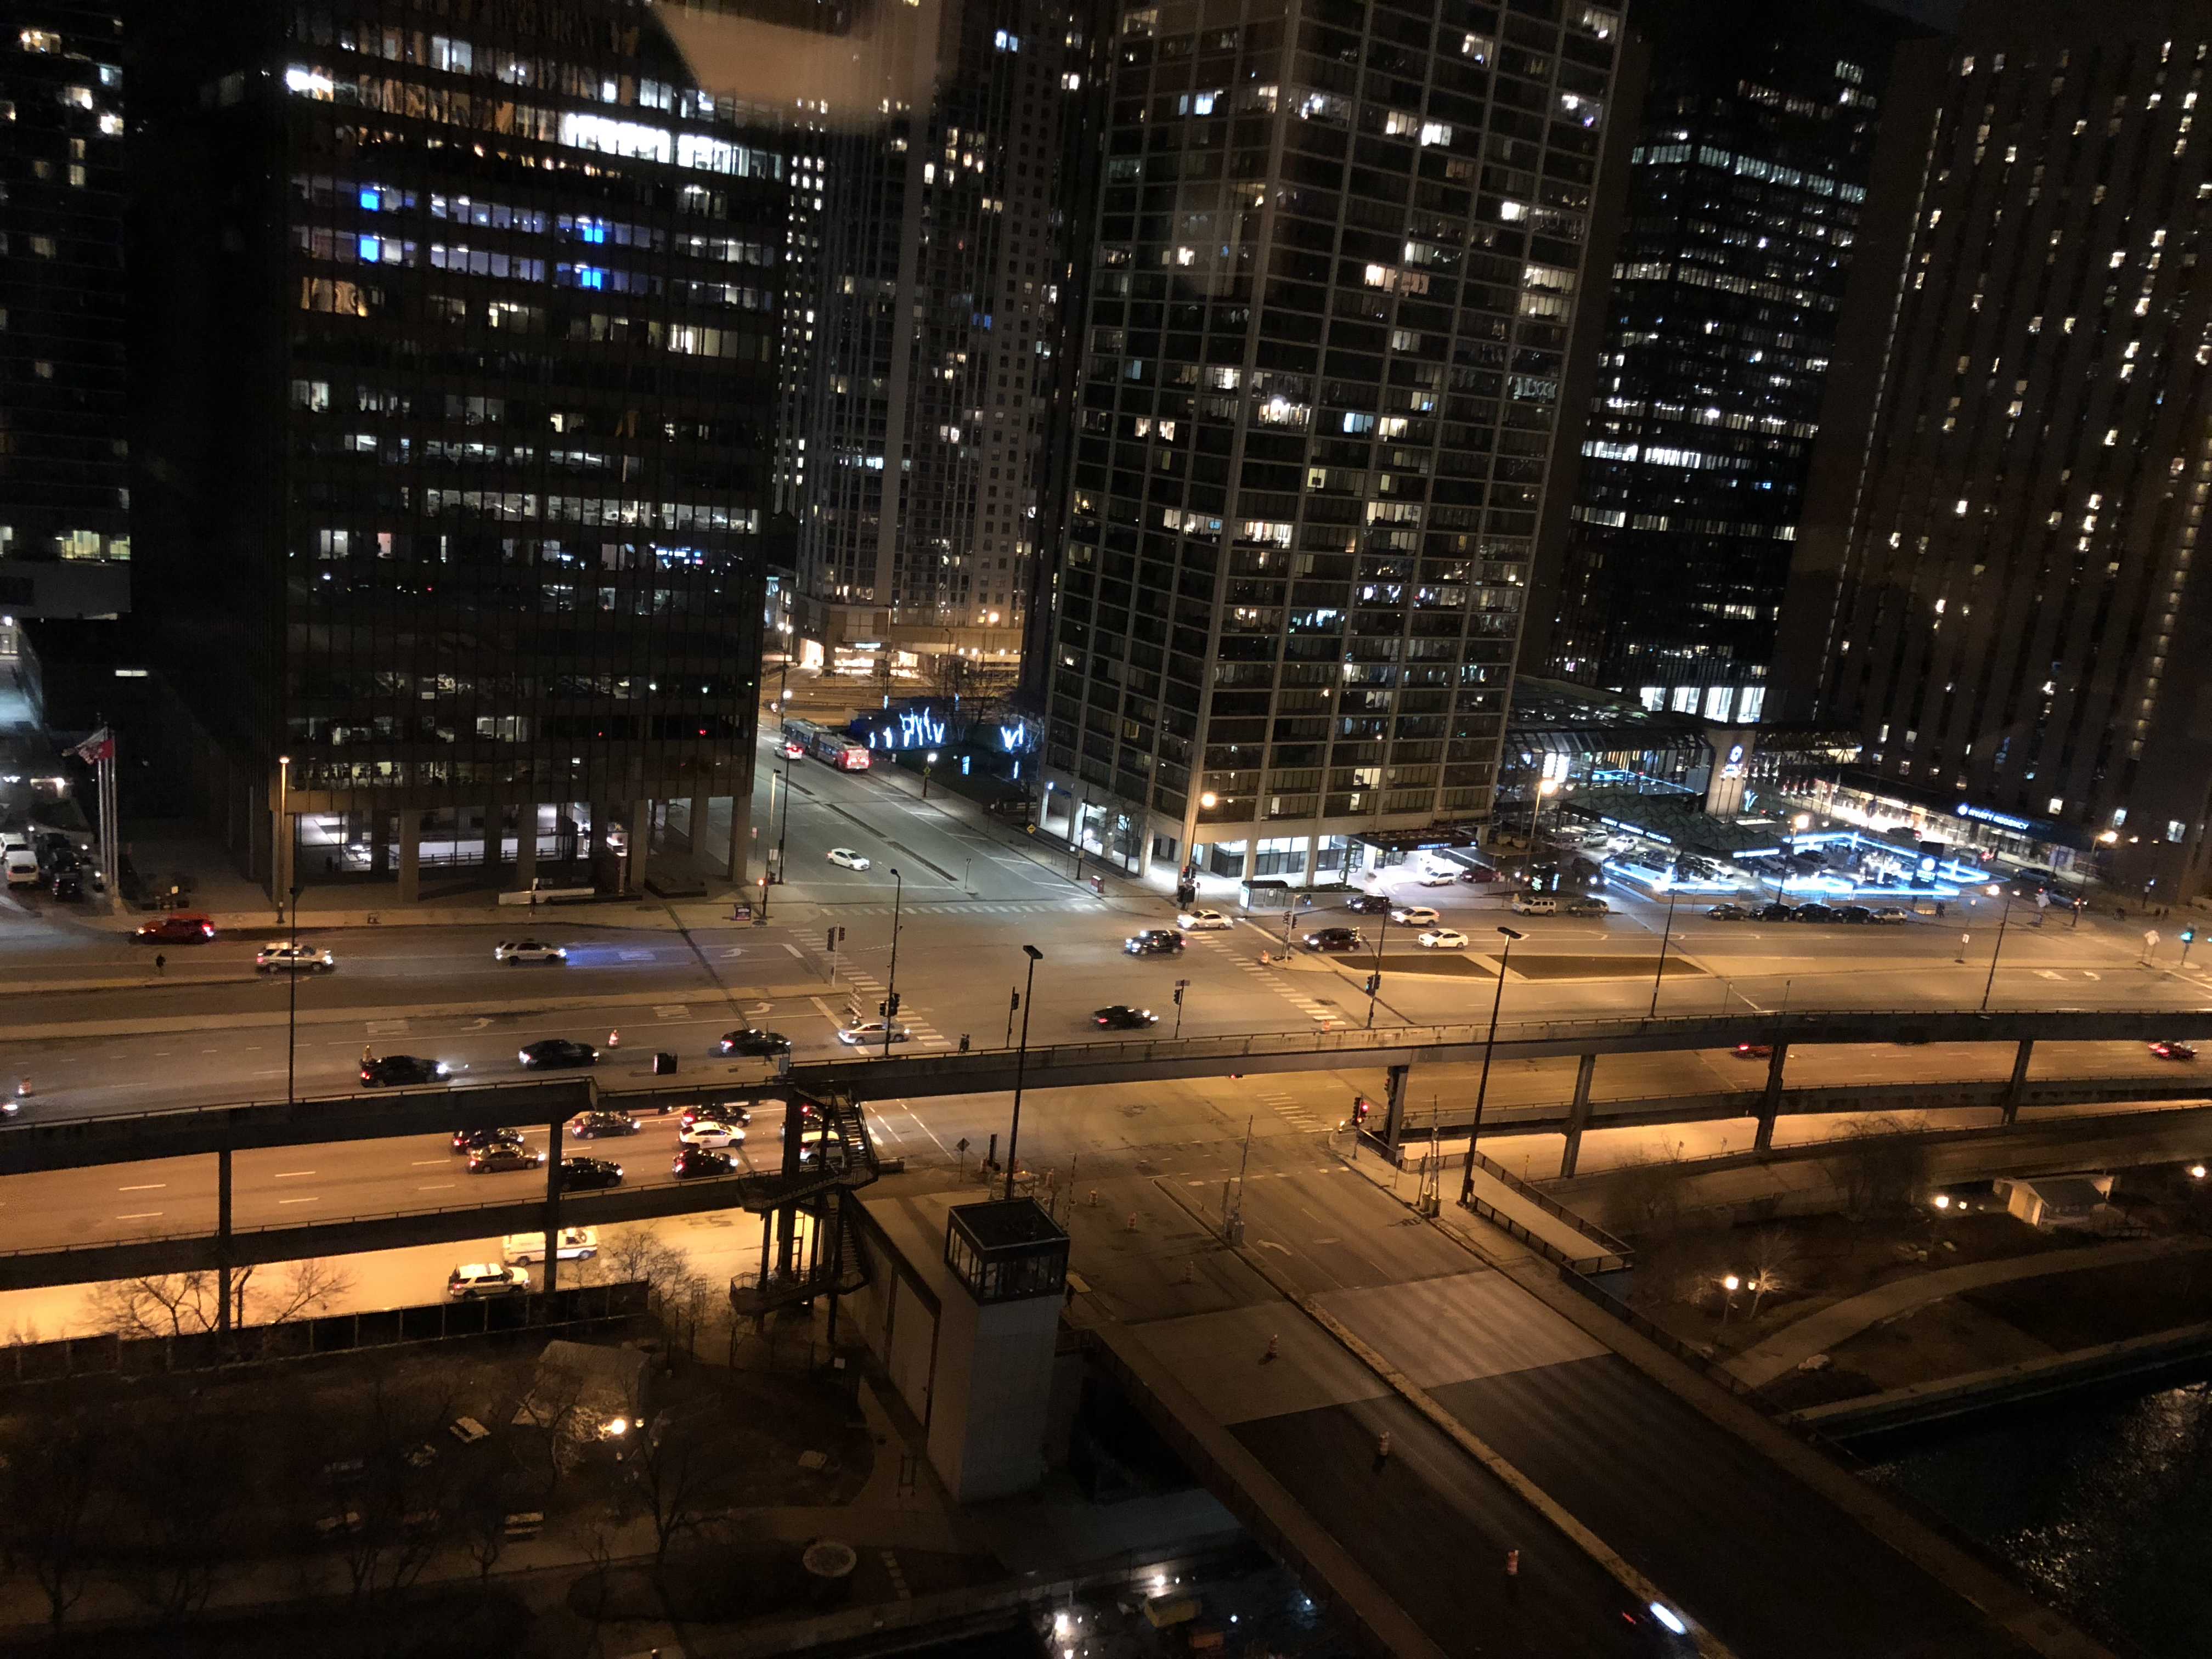 One night in Chicago